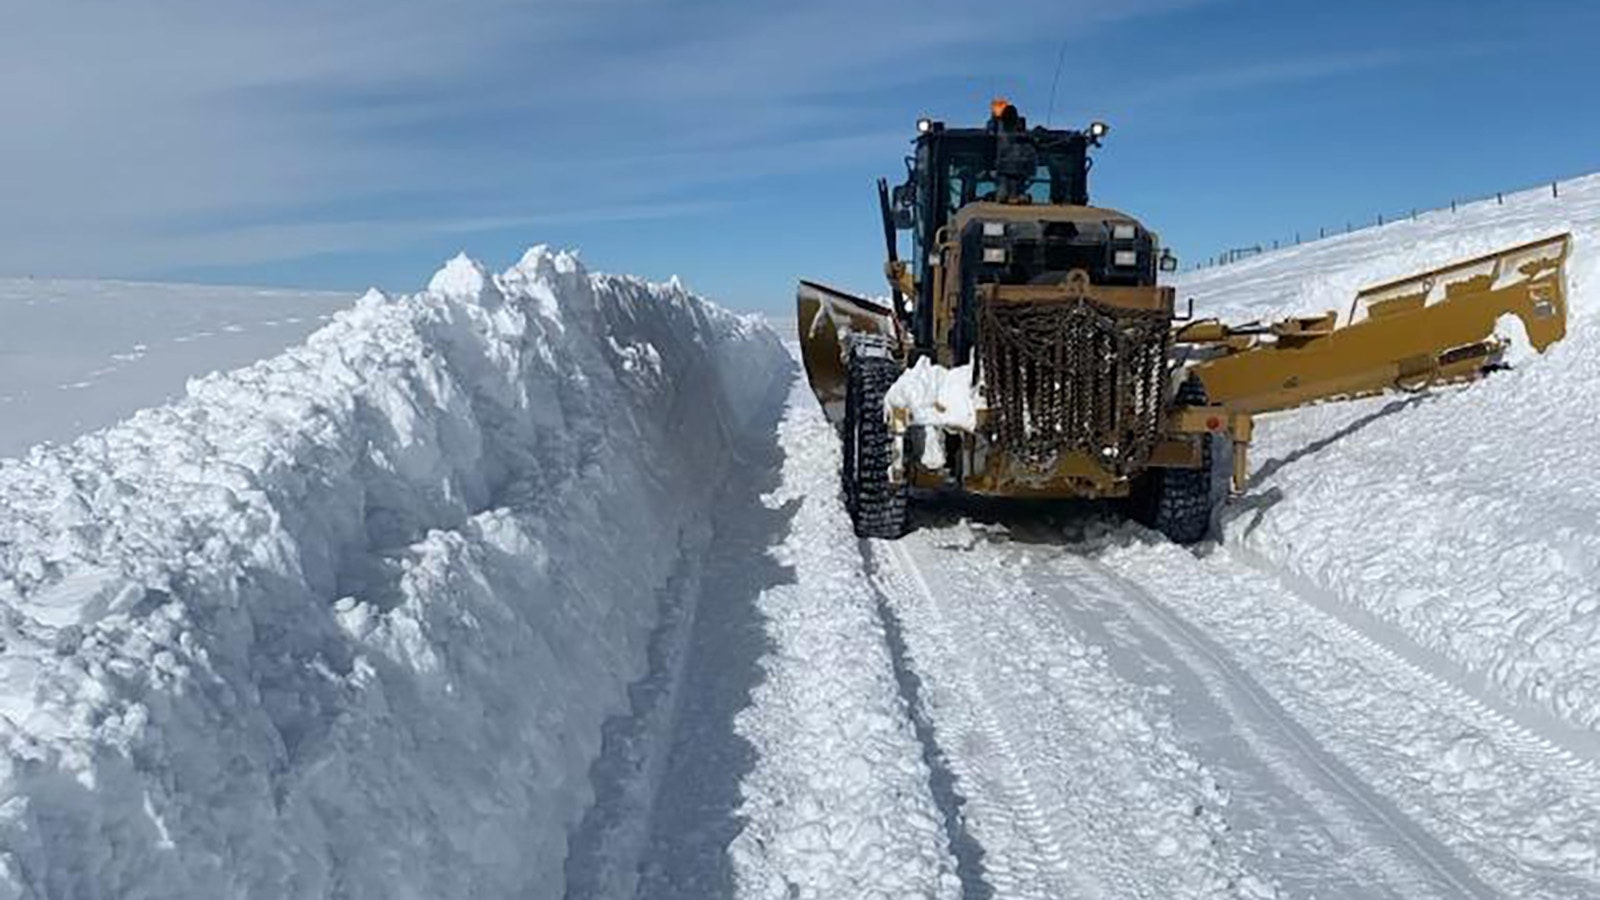 Personnel shortages, worn equipment and brutal weather made for a tough winter for the Wyoming Department of Transportation.